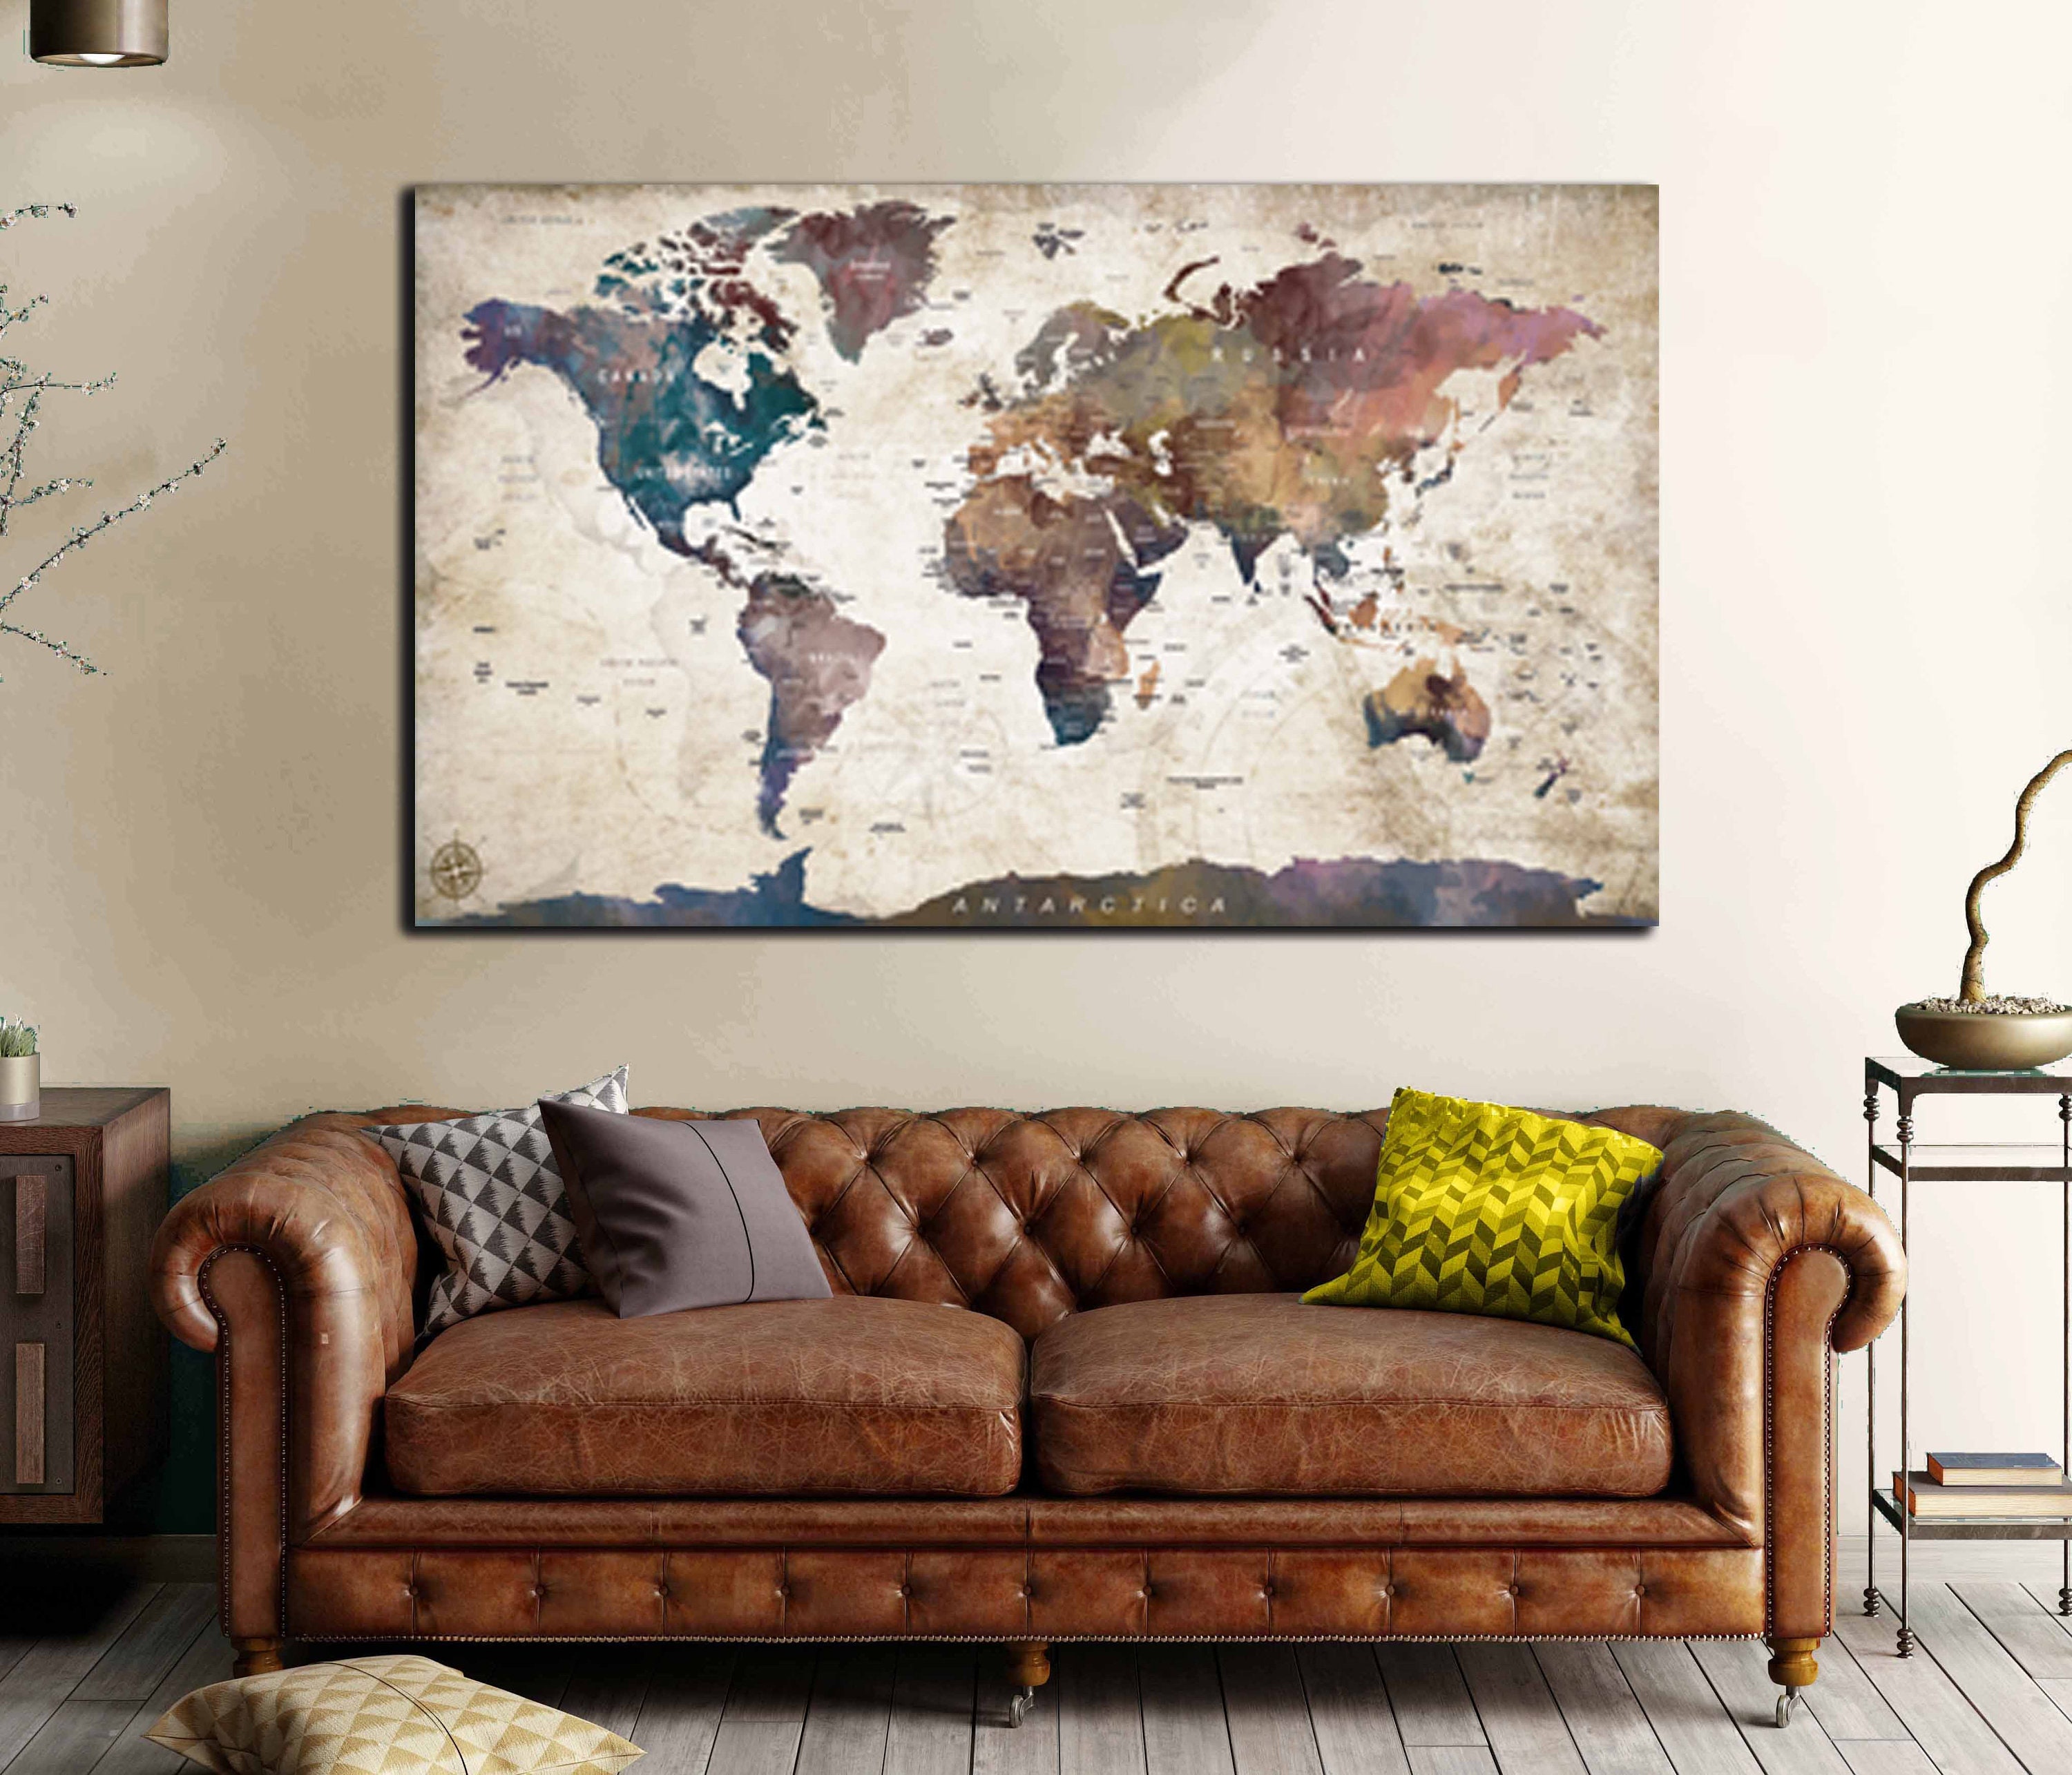 26x40 Wall Art for Living Room Bedroom Renditions Gallery Black Walnut Executive National Geographic World Travel Map with Push Pins Office 